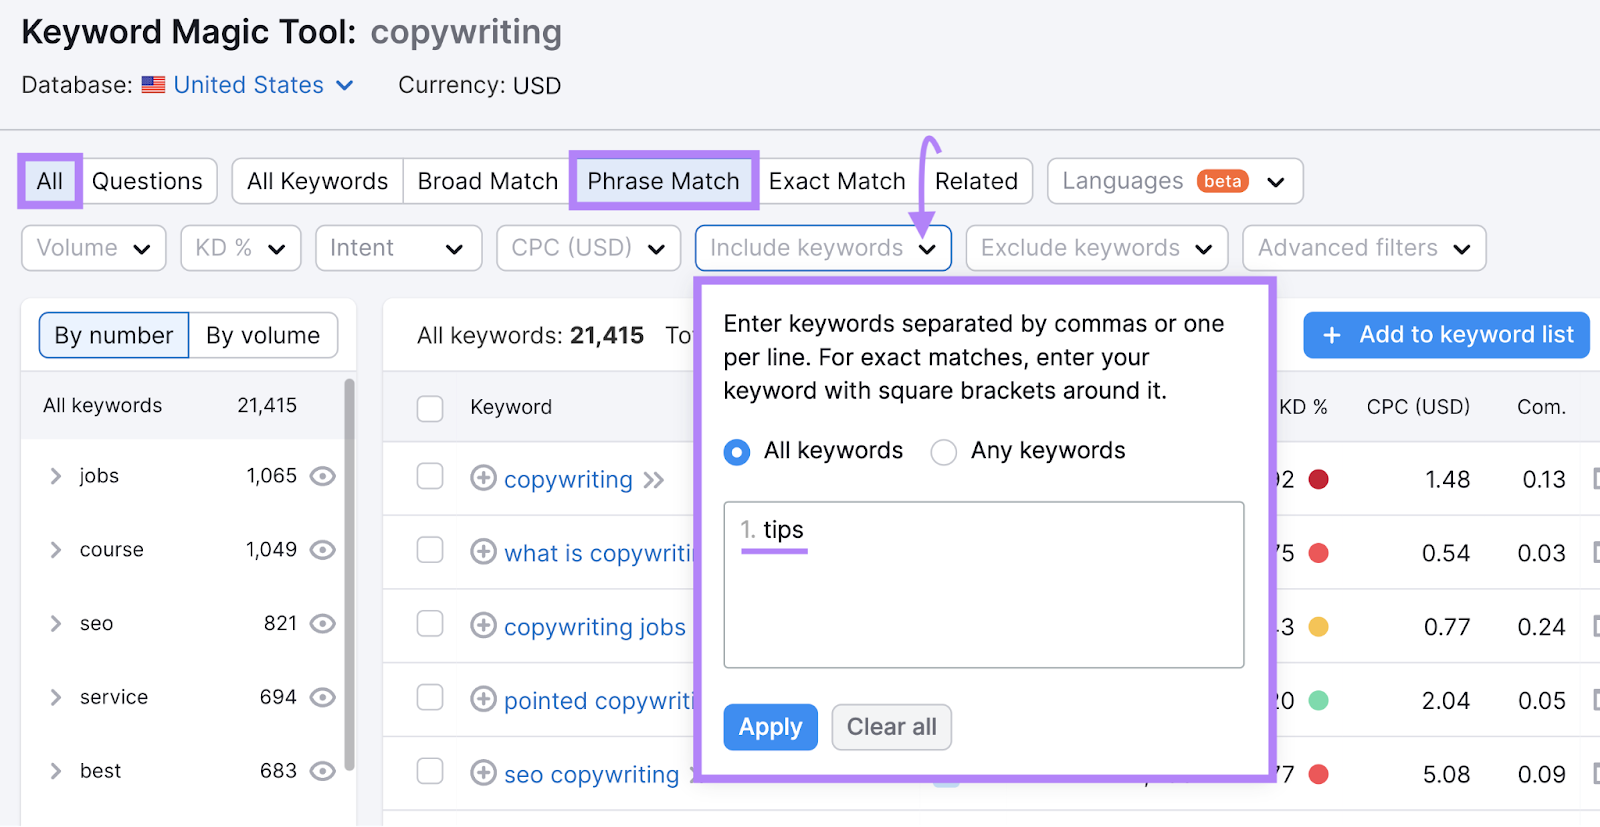 "All," "Phrase Match," and "Include keywords" filters highlighted in Keyword Magic Tool